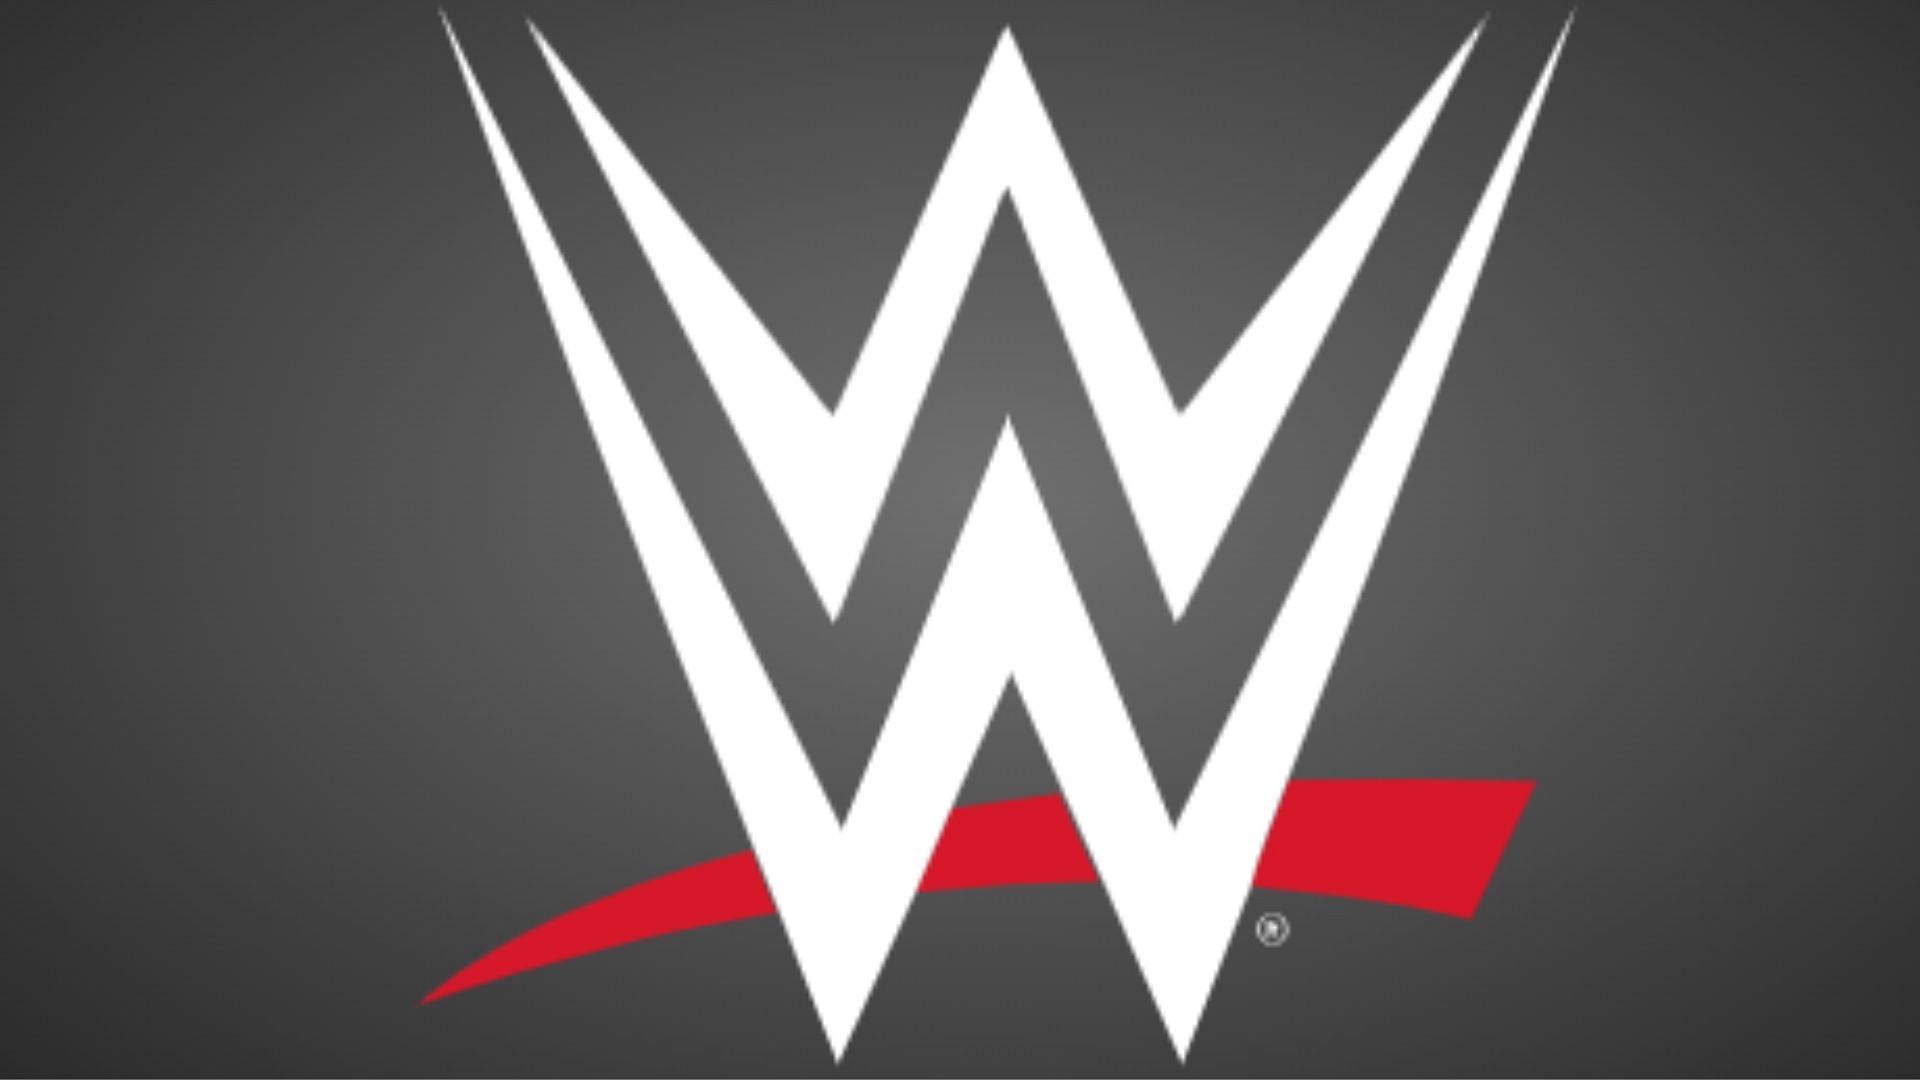 WWE is one of the world